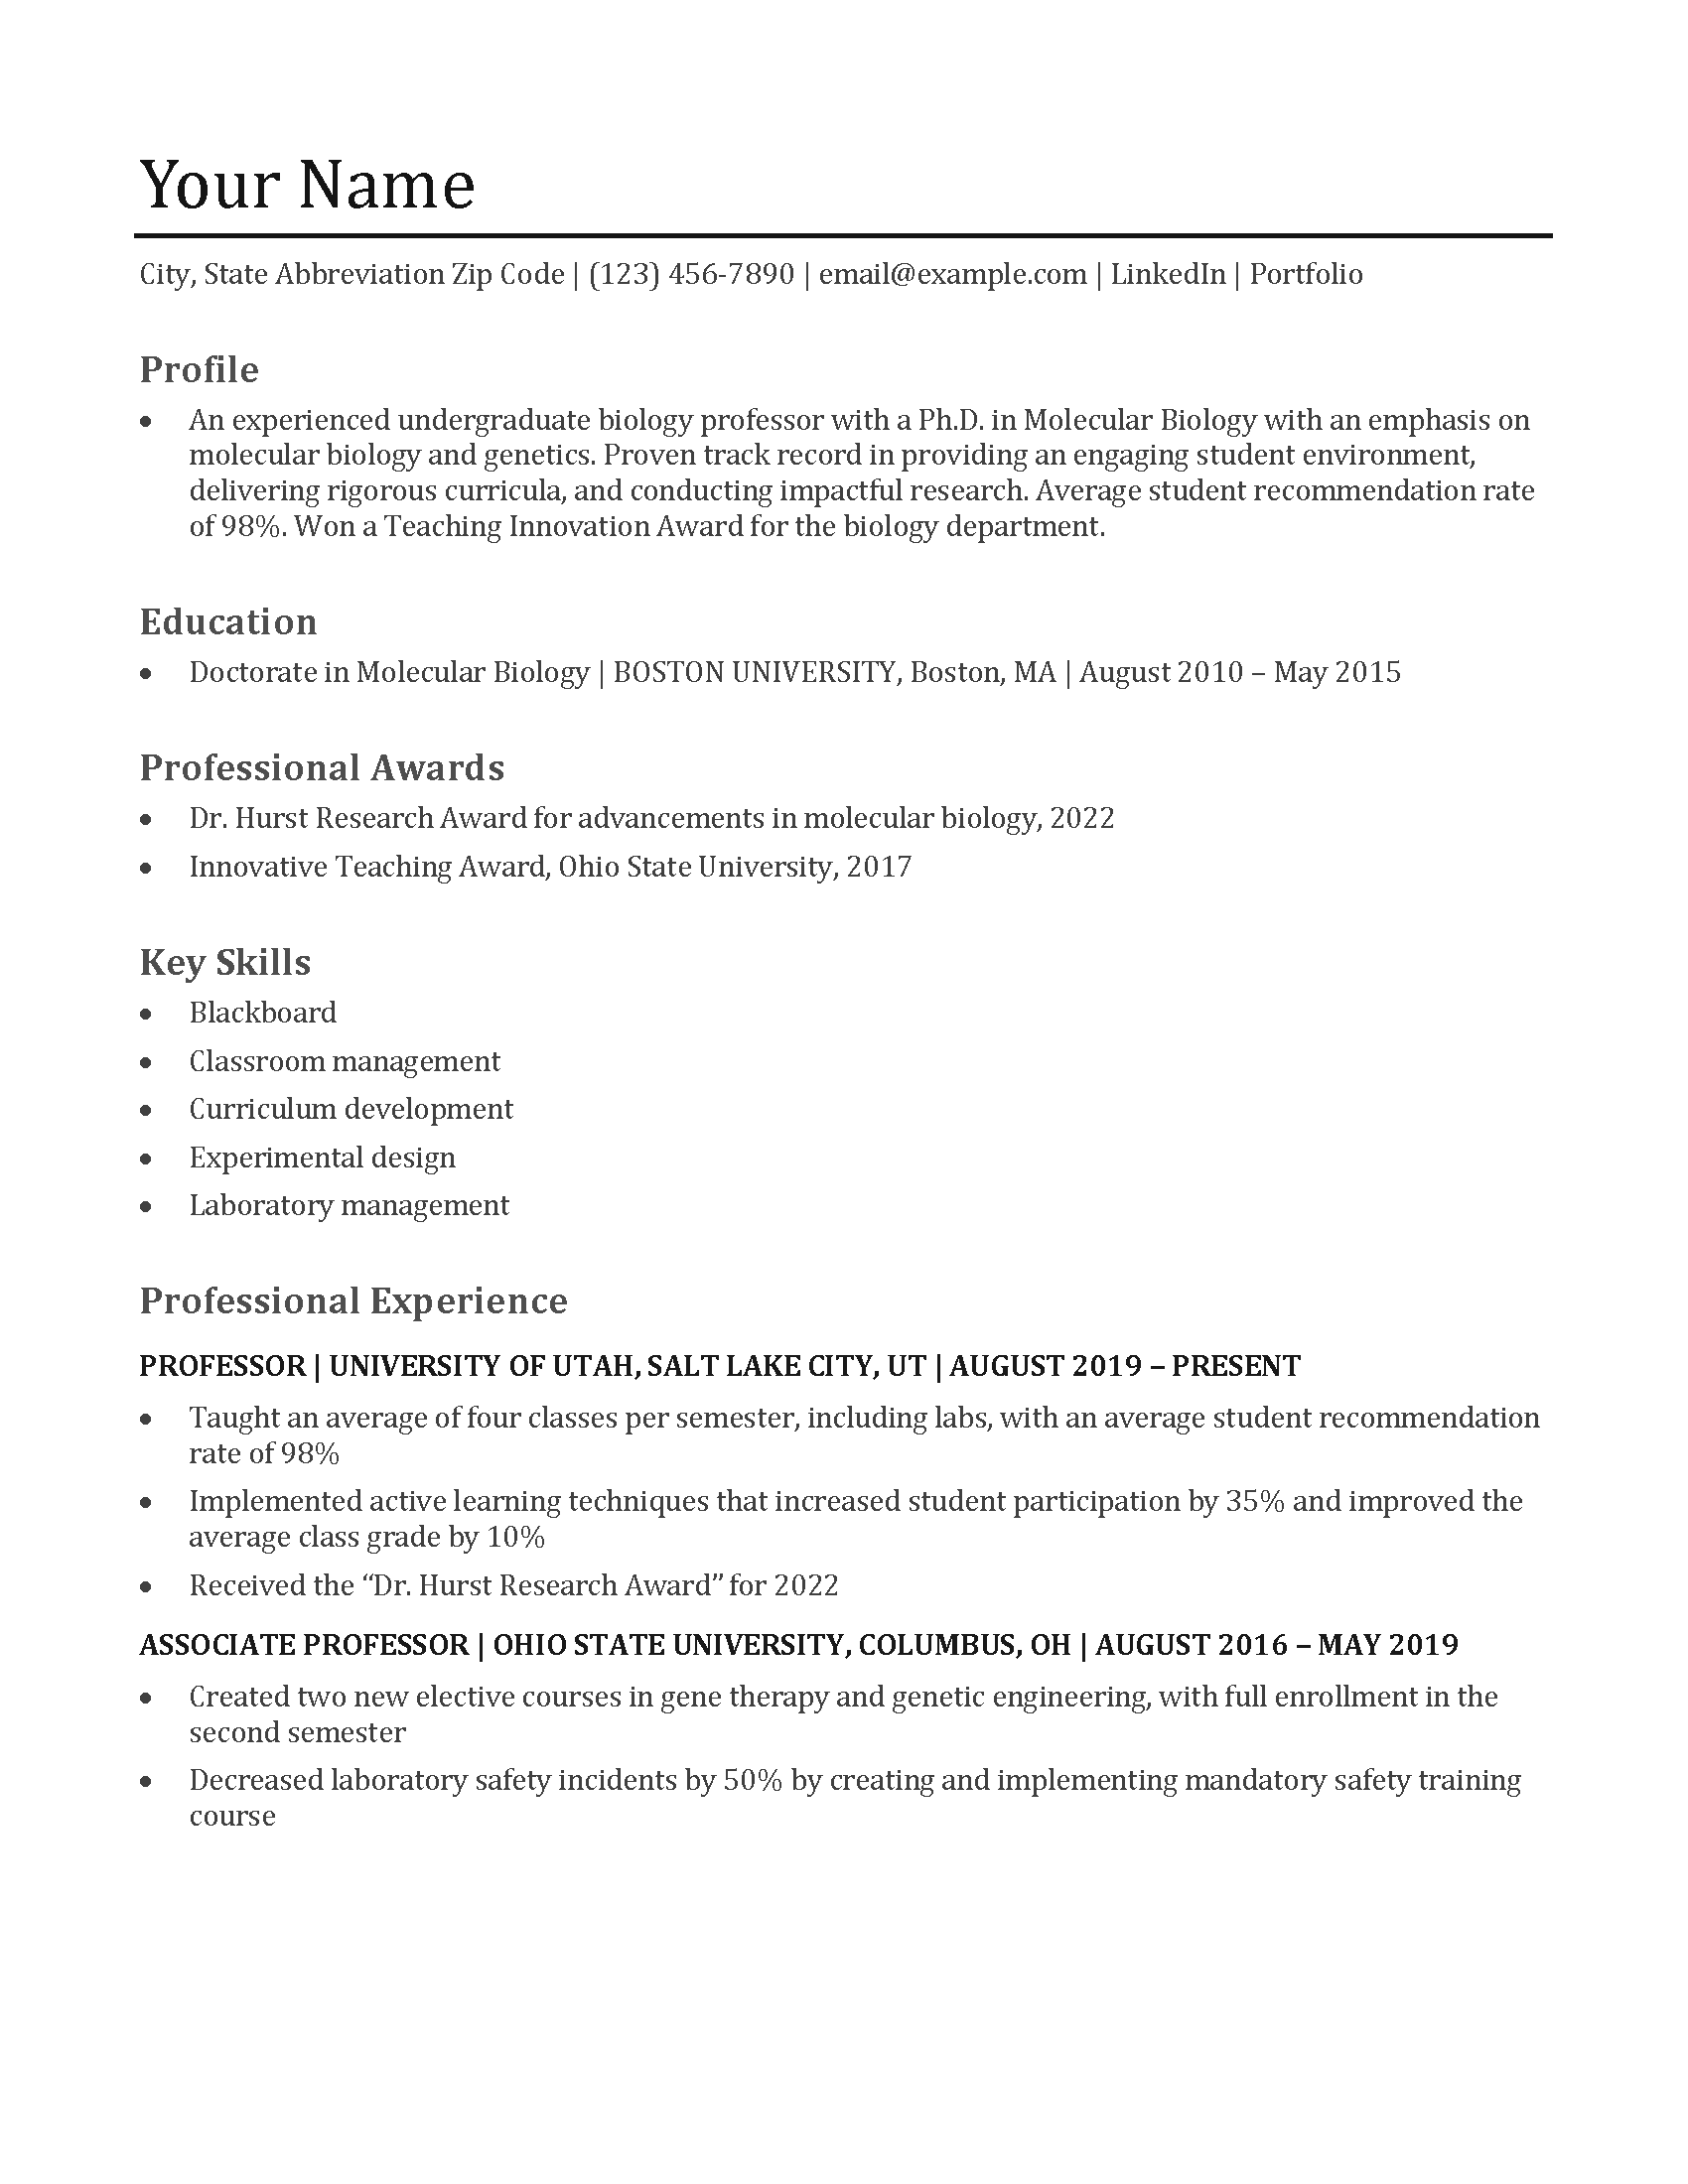 Traditional (Classic) Resume Example